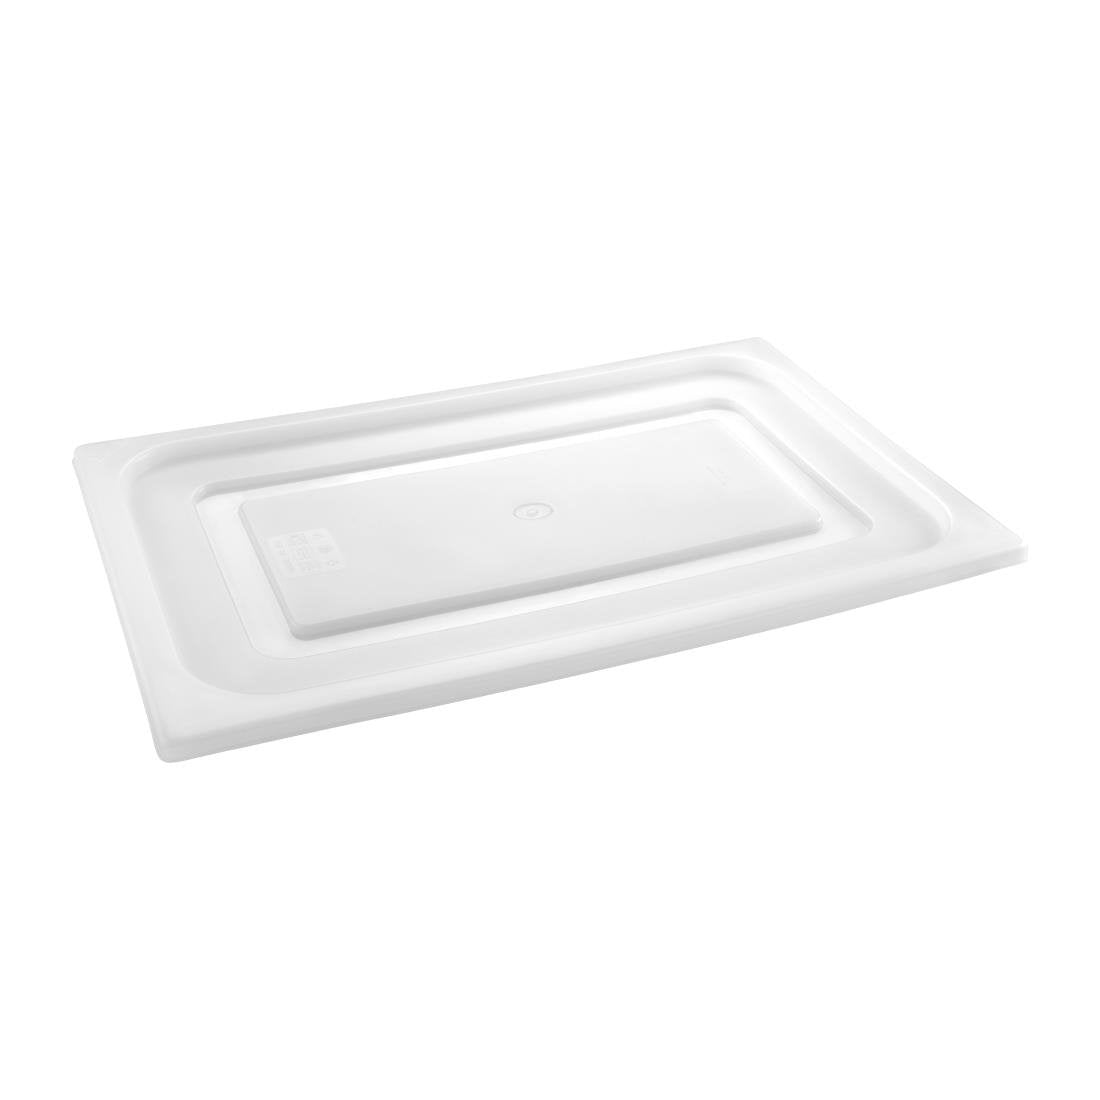 HT882 Pujadas Clear Polinorm Gastronorm Lid 1/6GN